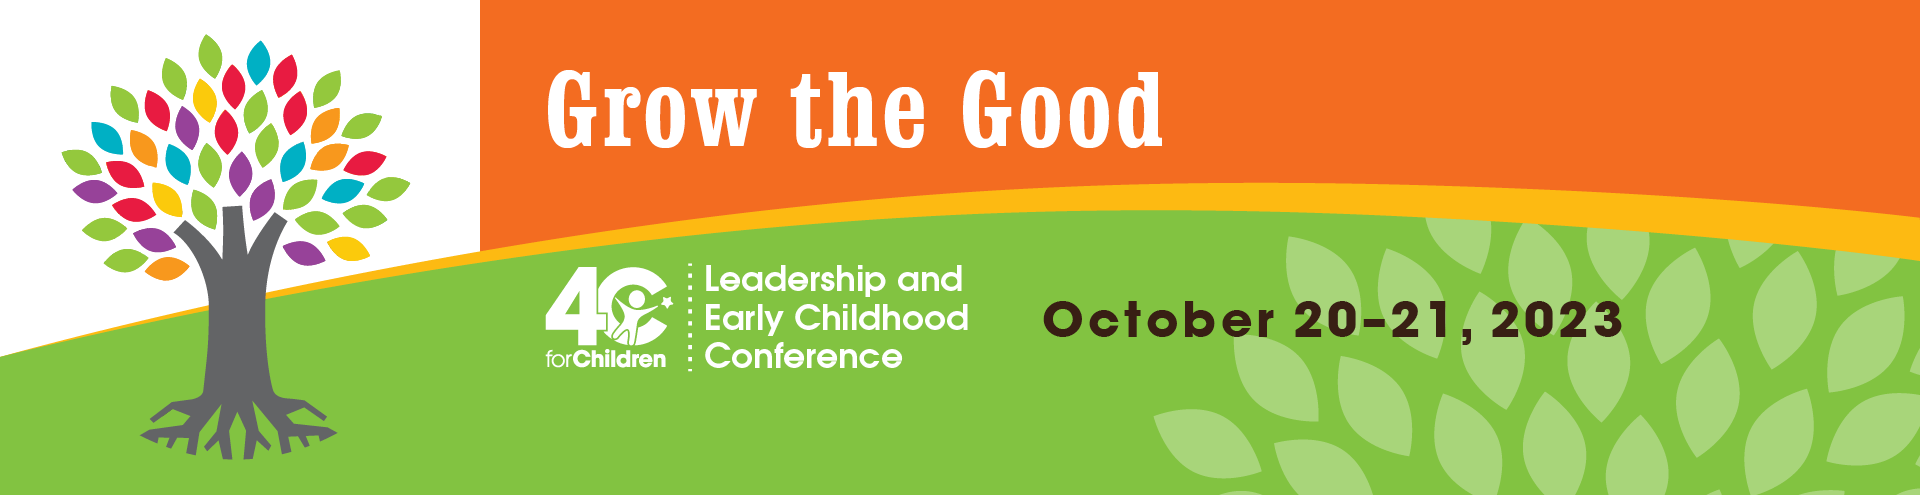 grow with good conference